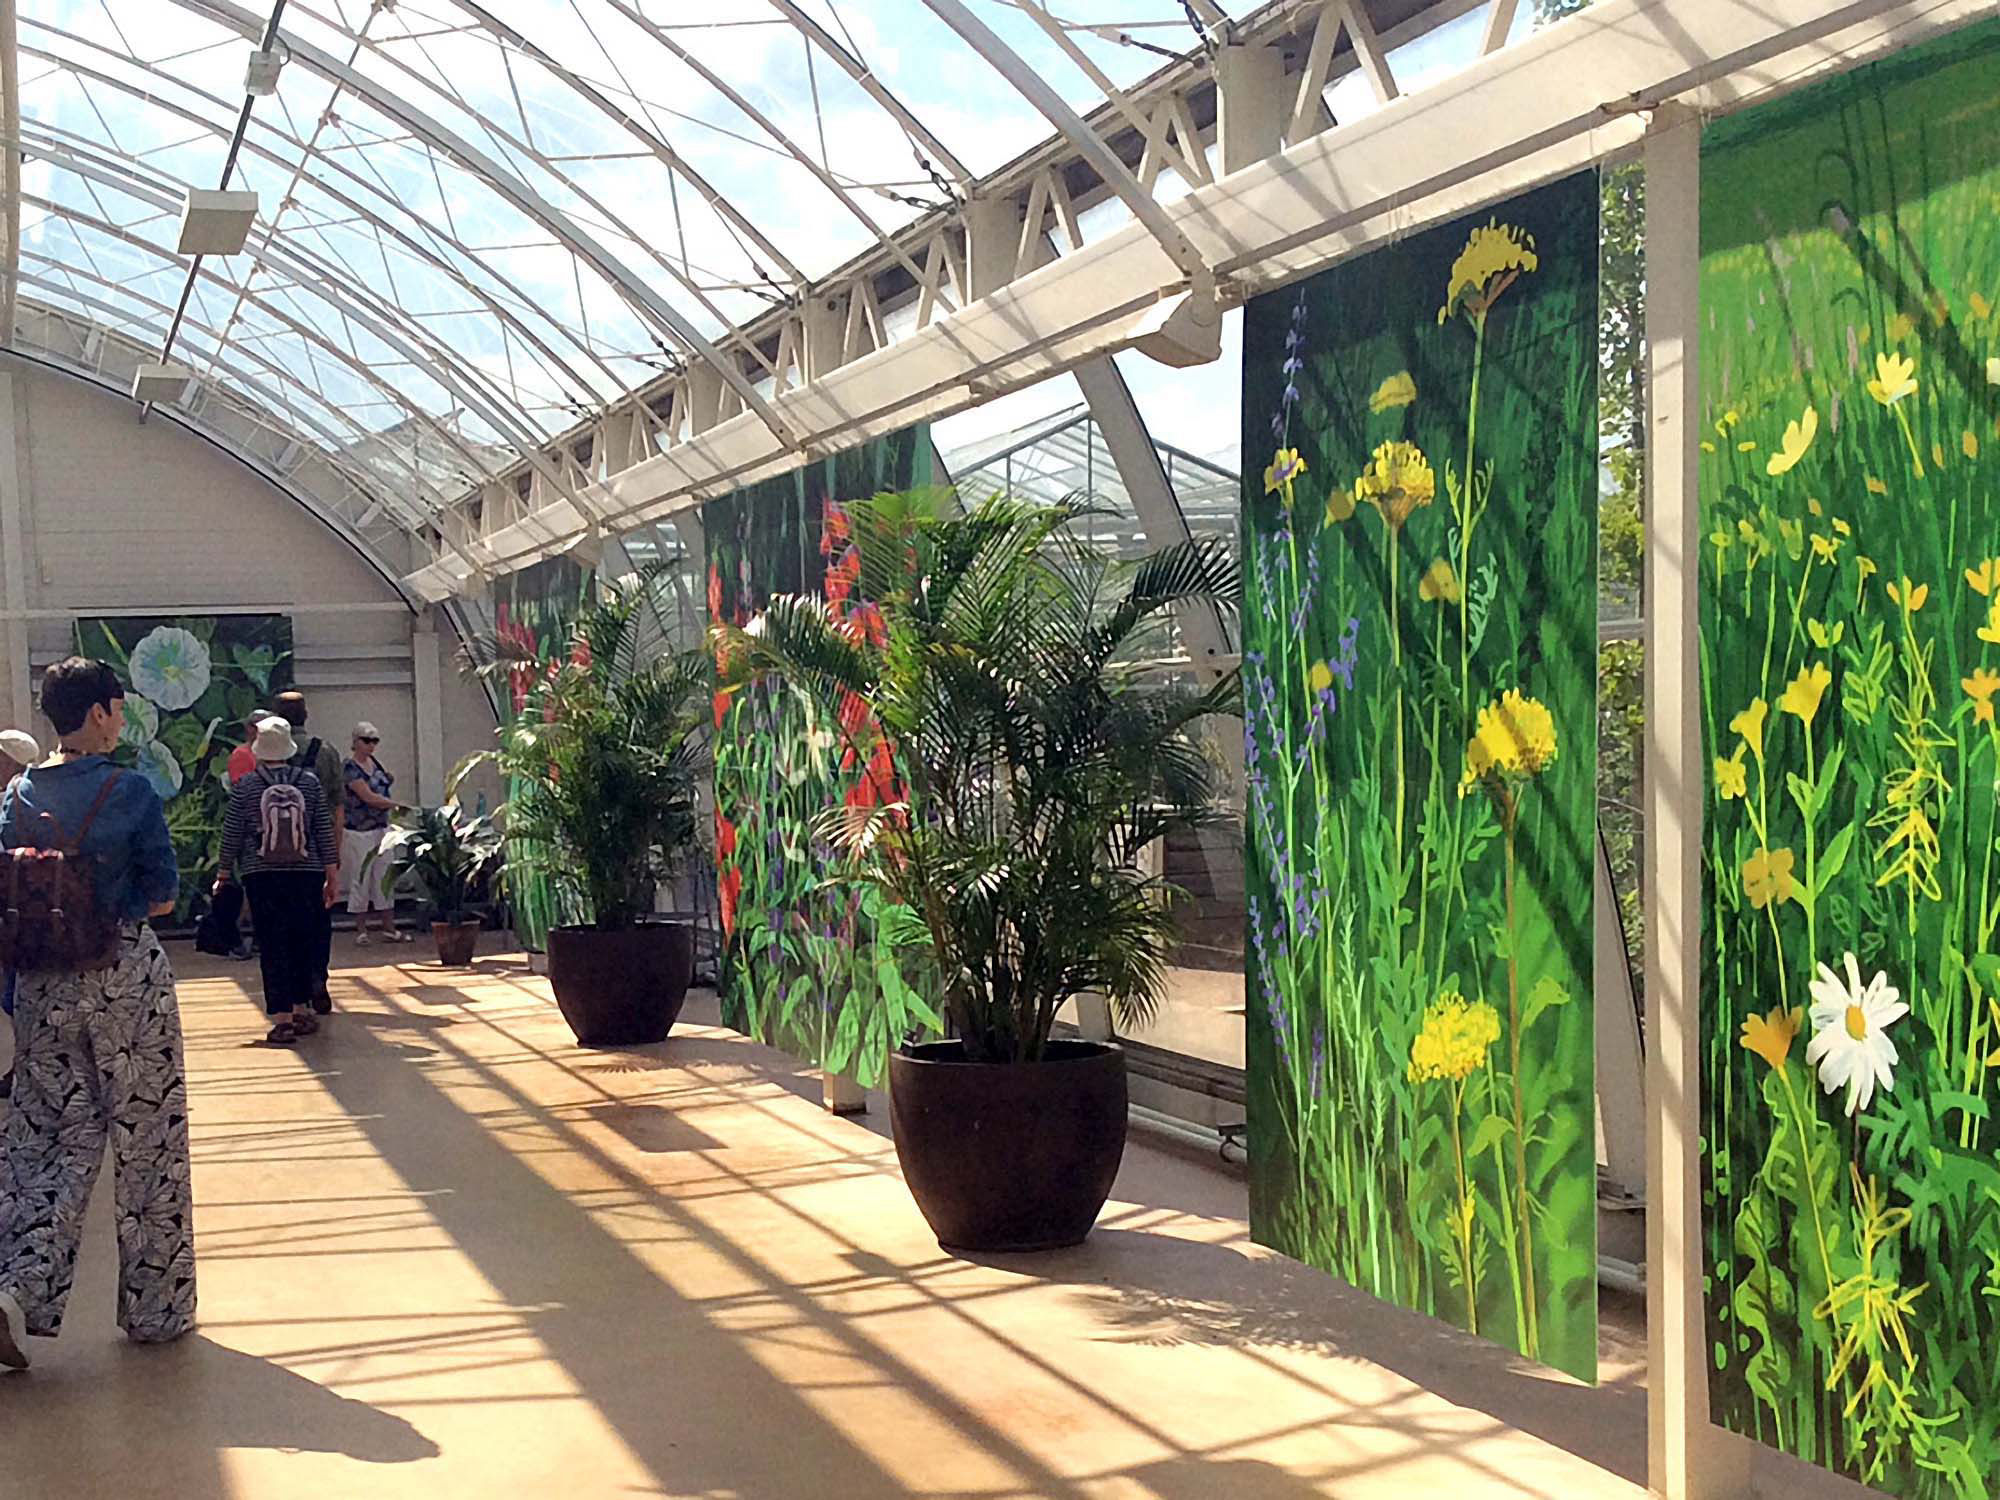 ‘The Digital Garden 2018®, iPad drawings with Augmented Reality (AR) at the Royal Horticultural Society Garden Wisley, UK. 3